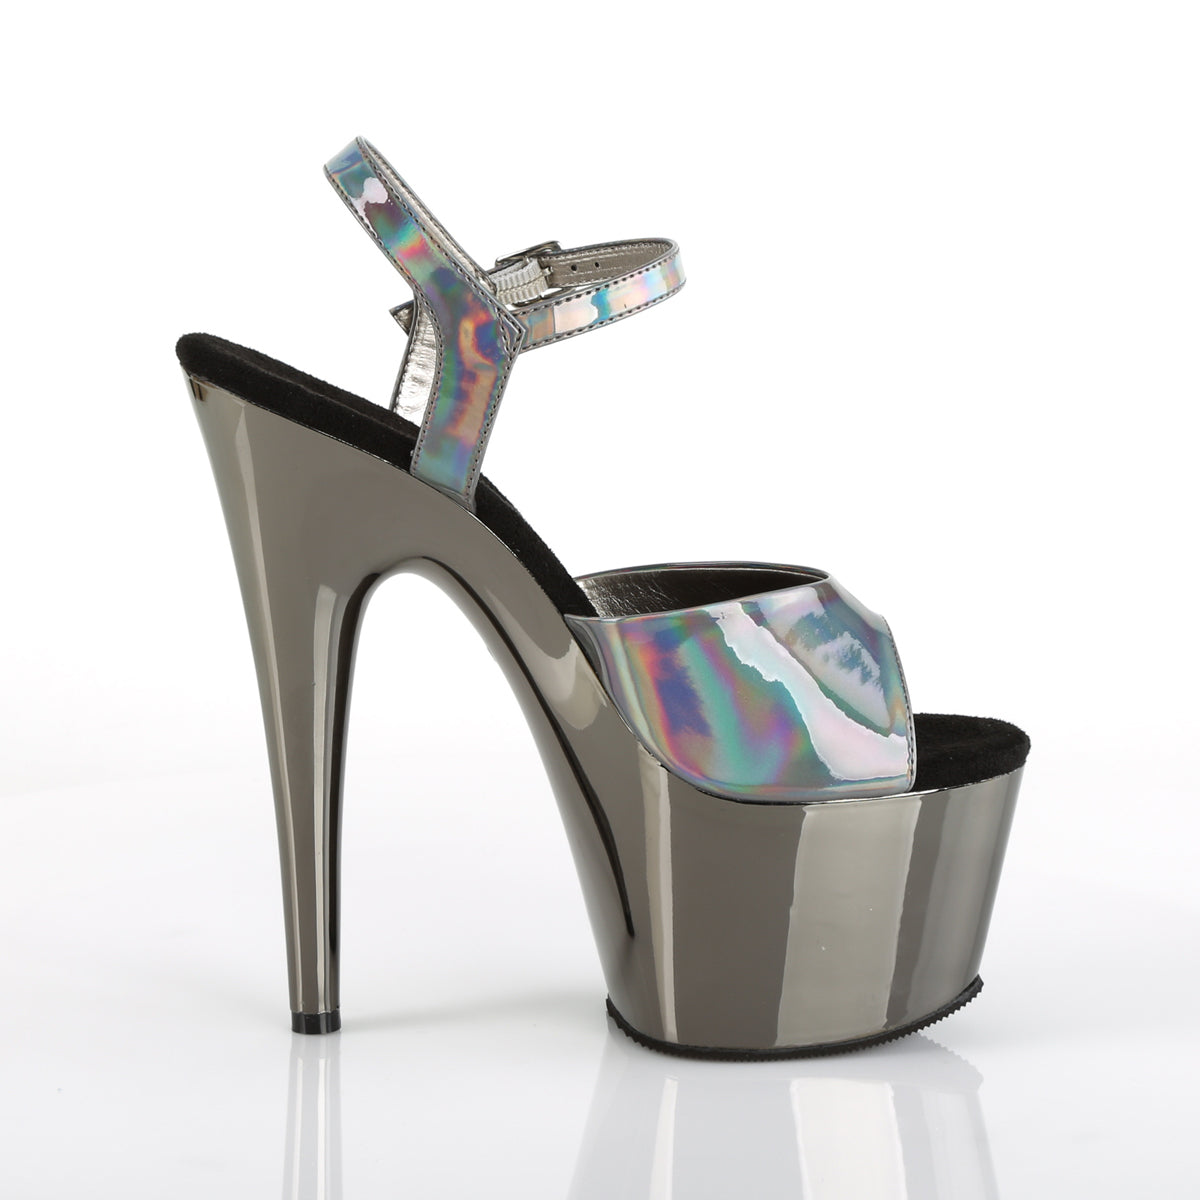 ADORE-709HGCH Pleaser 7 Inch Heel Pewter Pole Dancing Shoes-Pleaser- Sexy Shoes Fetish Heels